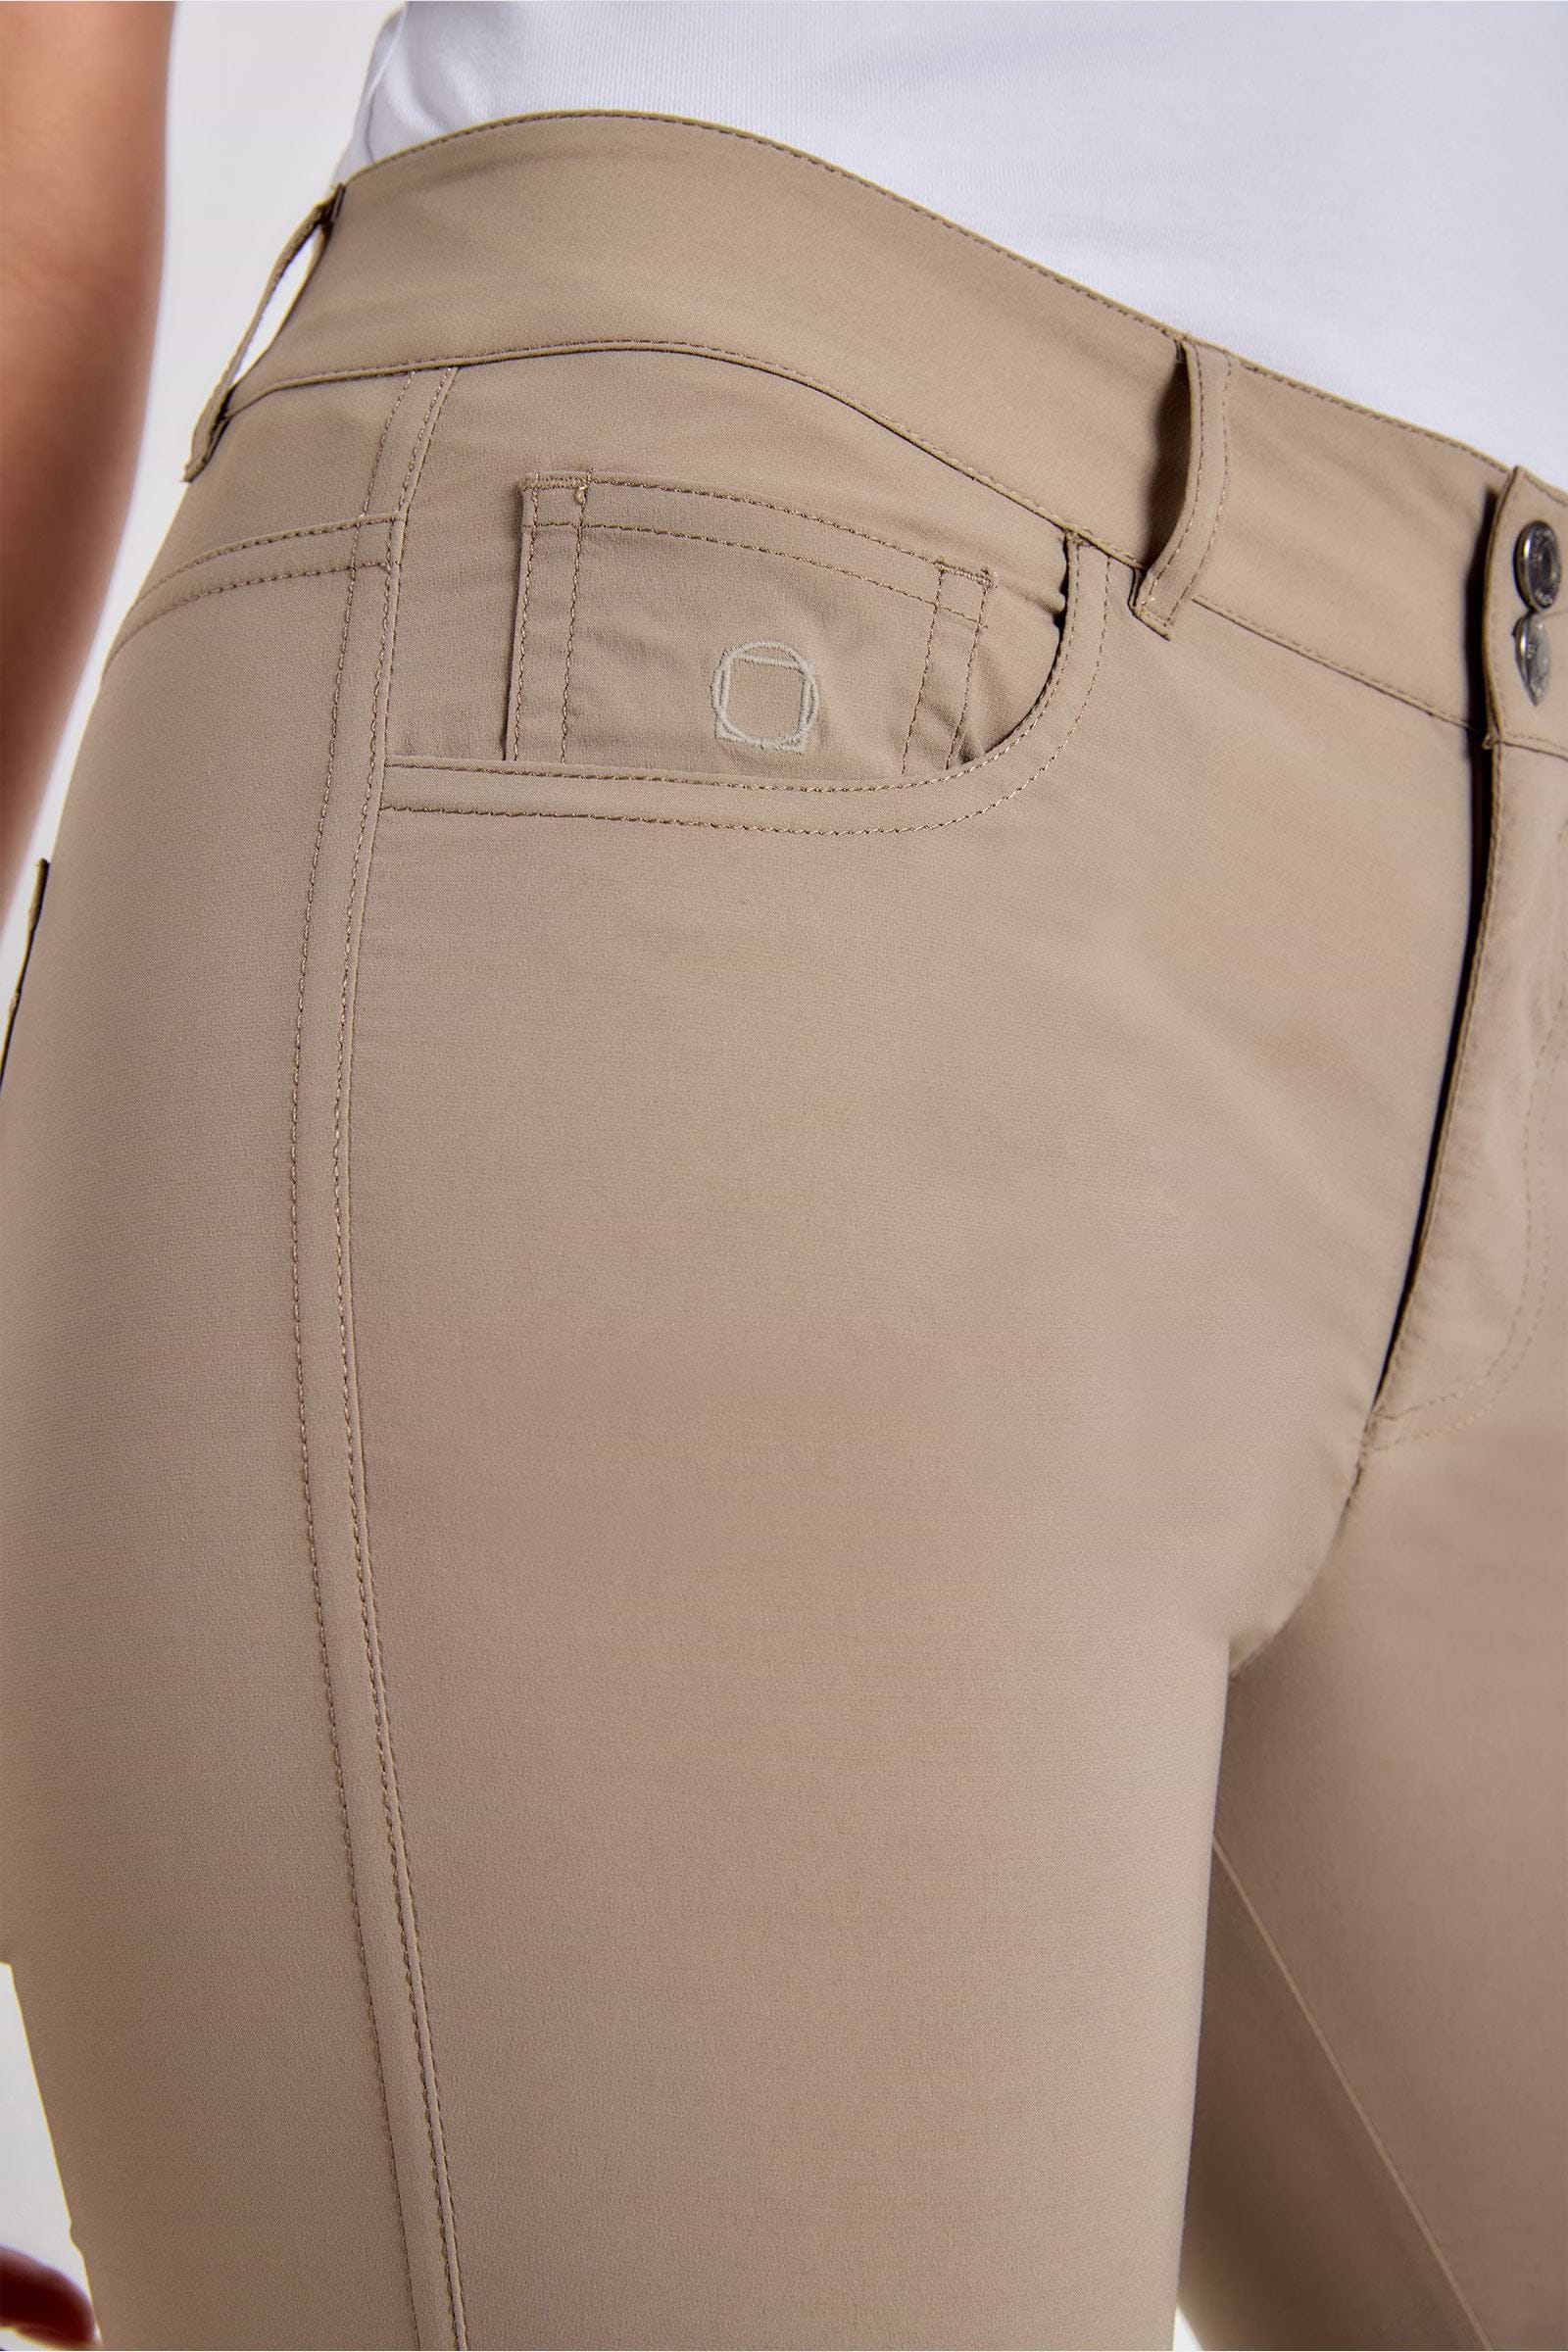 The Best Travel Pants. Front Pocket of the Luisa Skinny Jean Pant in Khaki